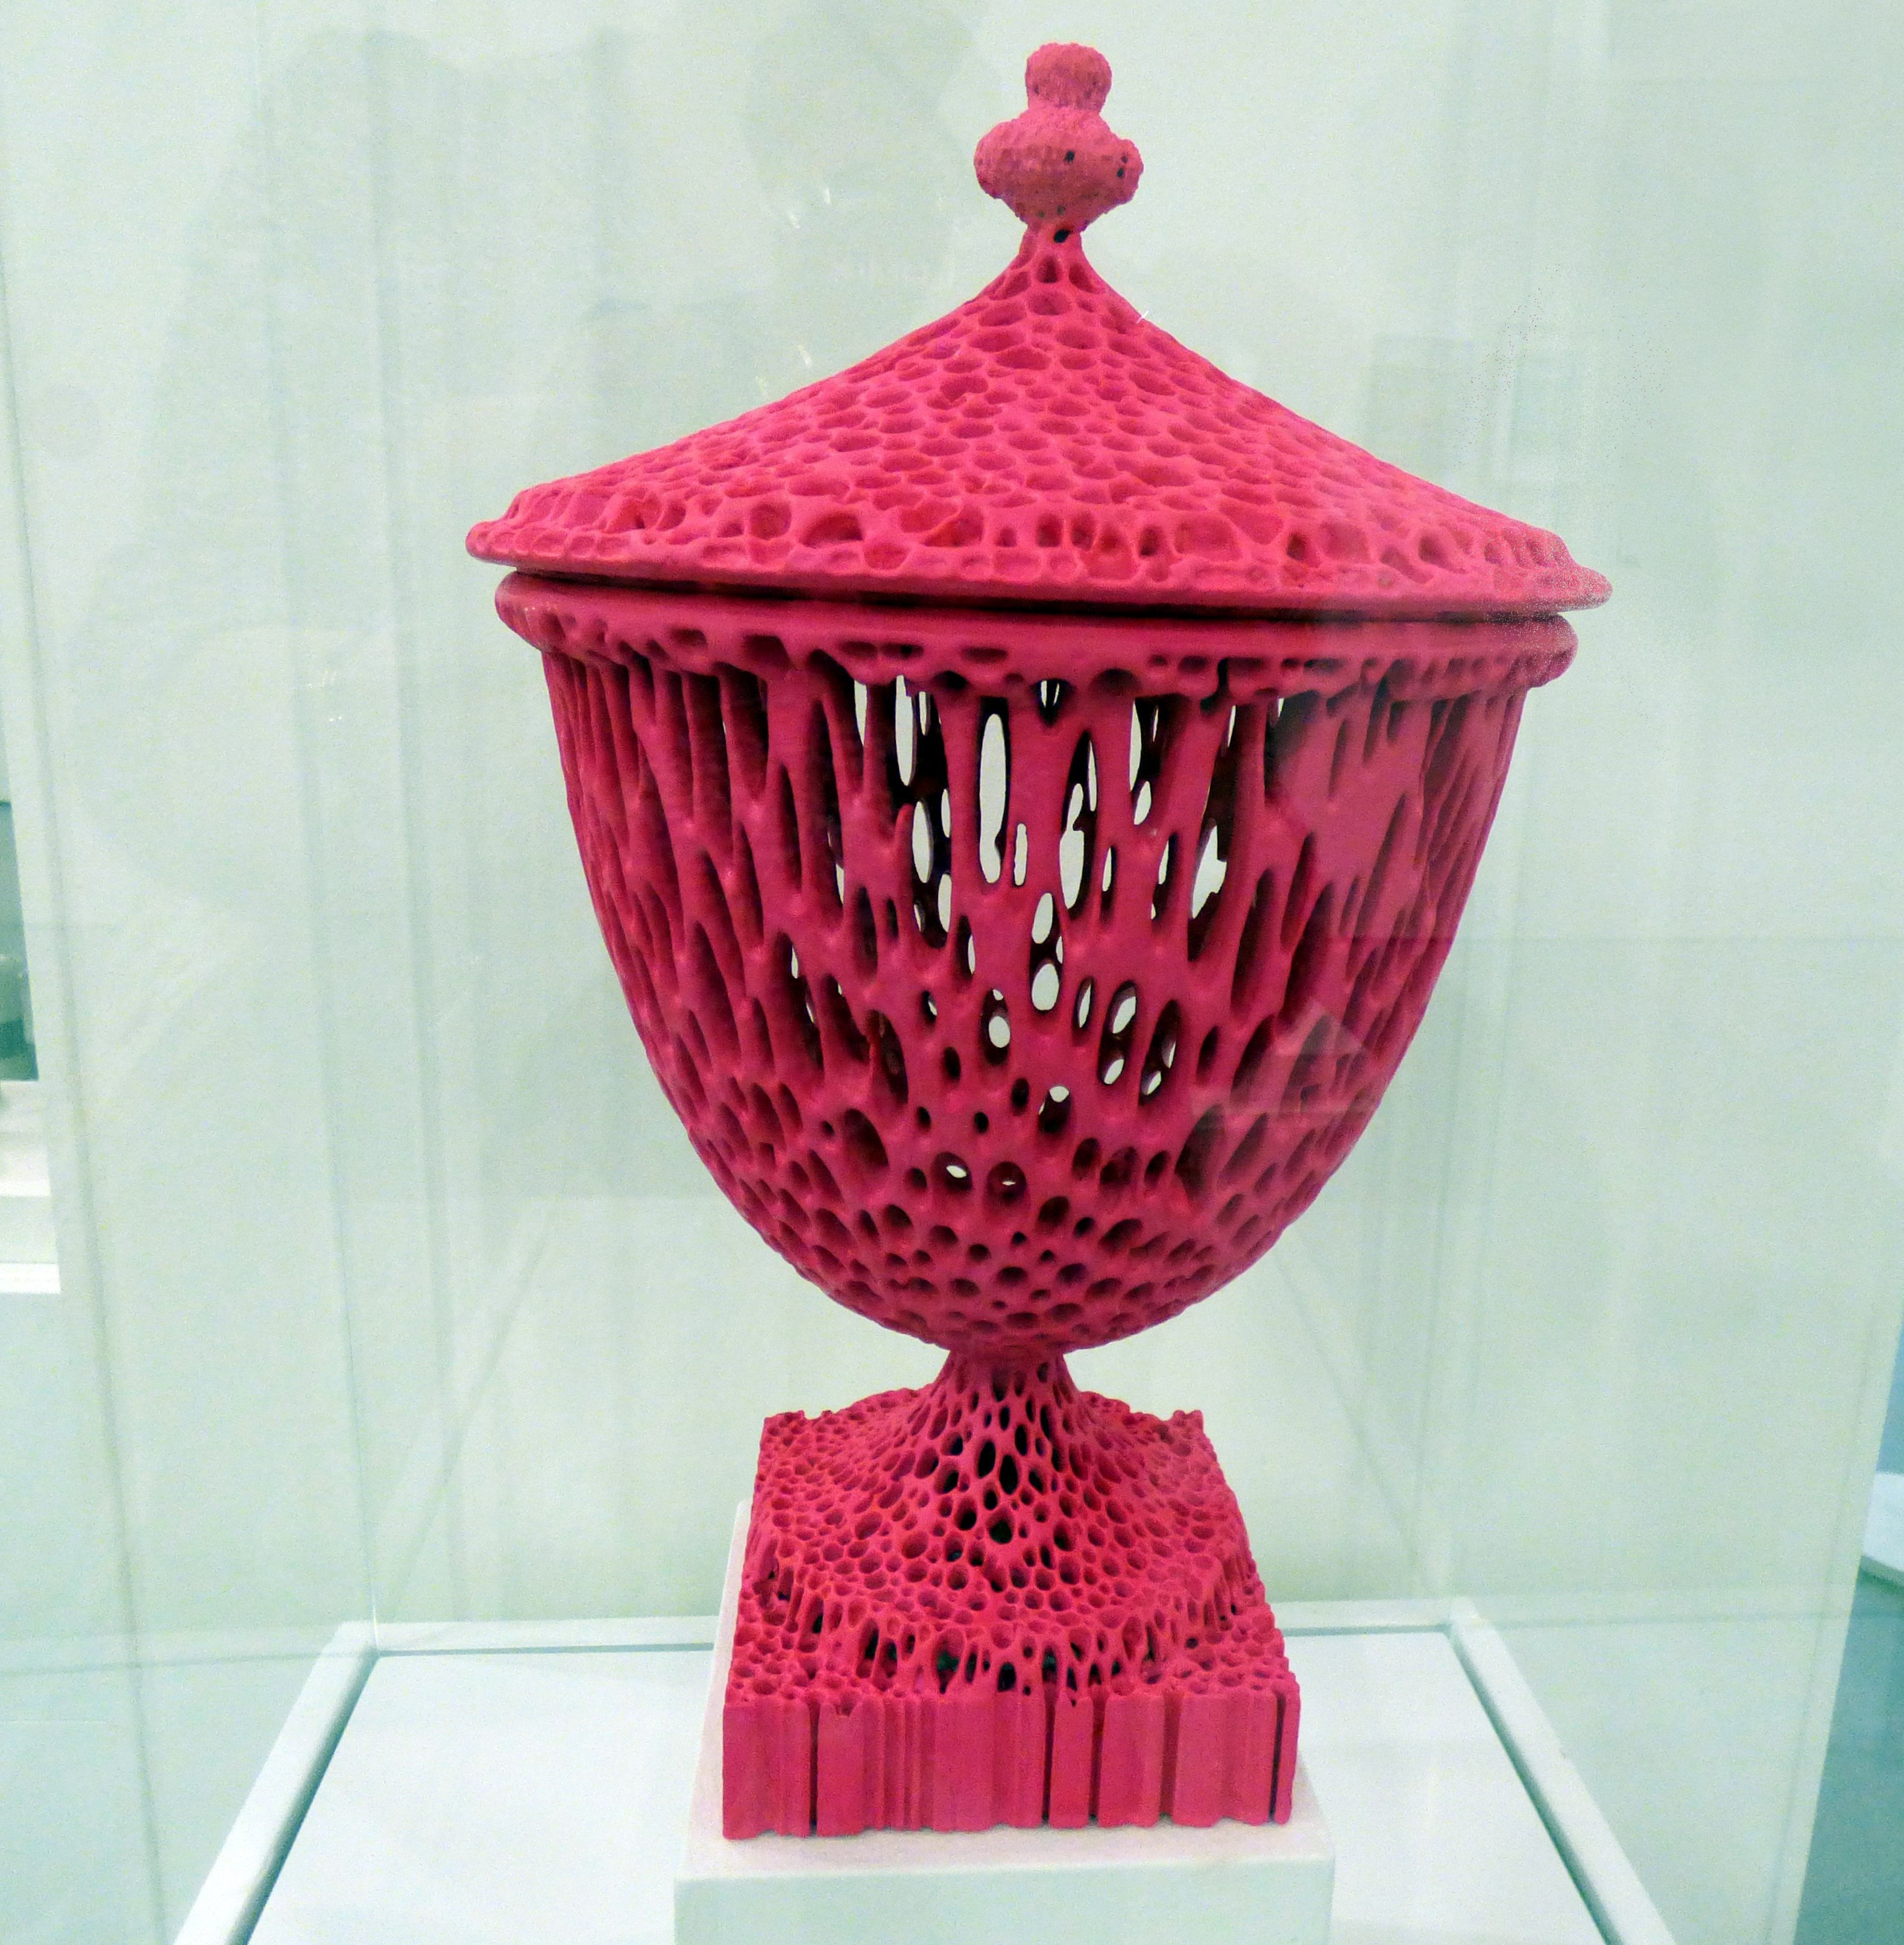 A TALL PINK ROUND WEDGWOODN'T TUREEN by Michael Eden, 3D printing, CRAFTED exhibition, Kirkby Gallery, 2016